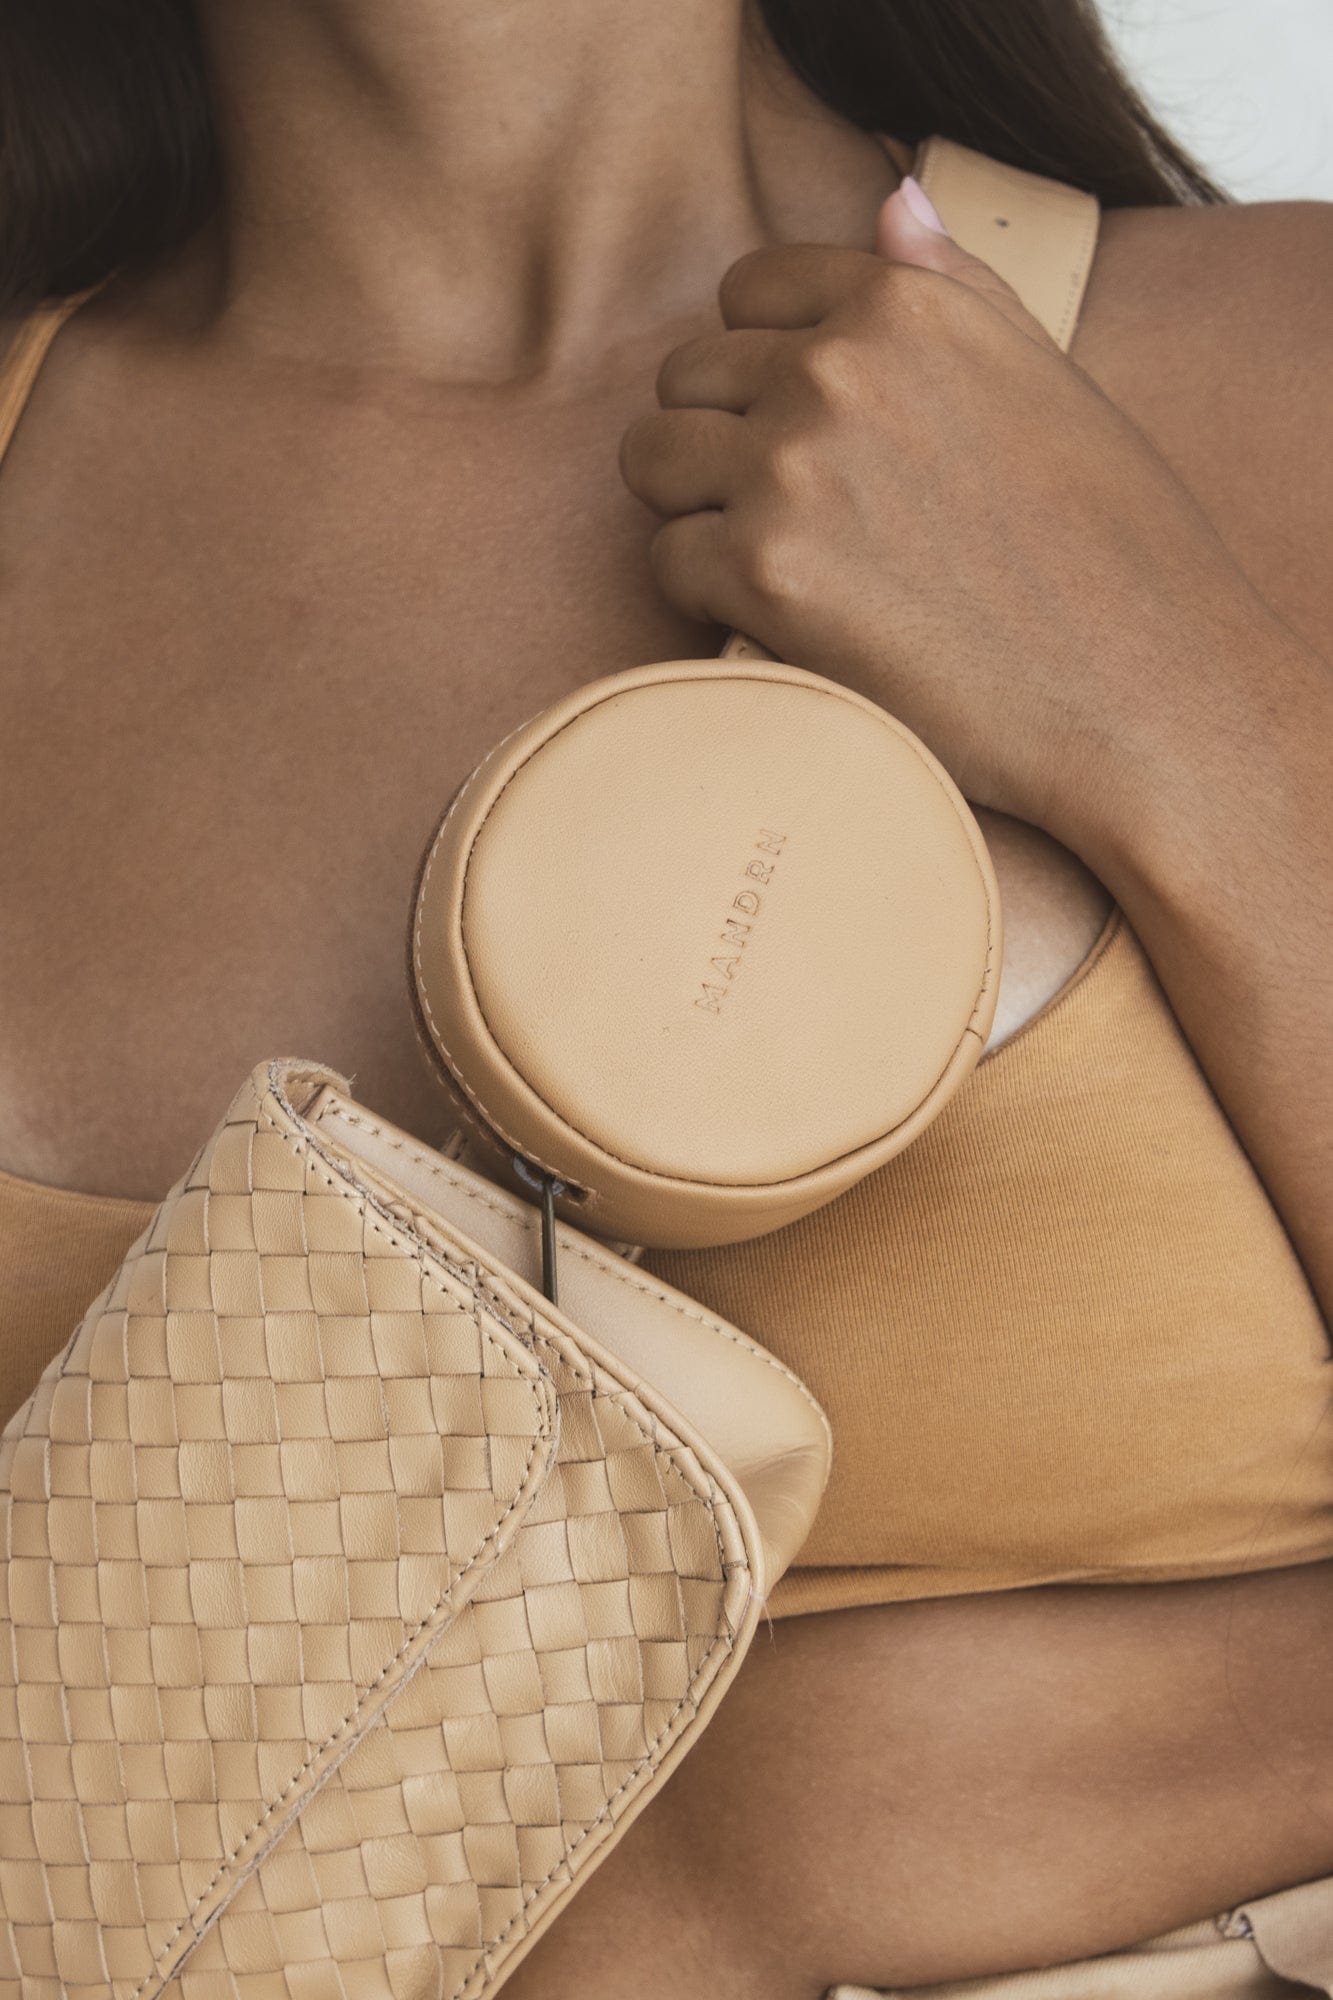 MANDRN | The Rover- Tan Leather Circle Pouch